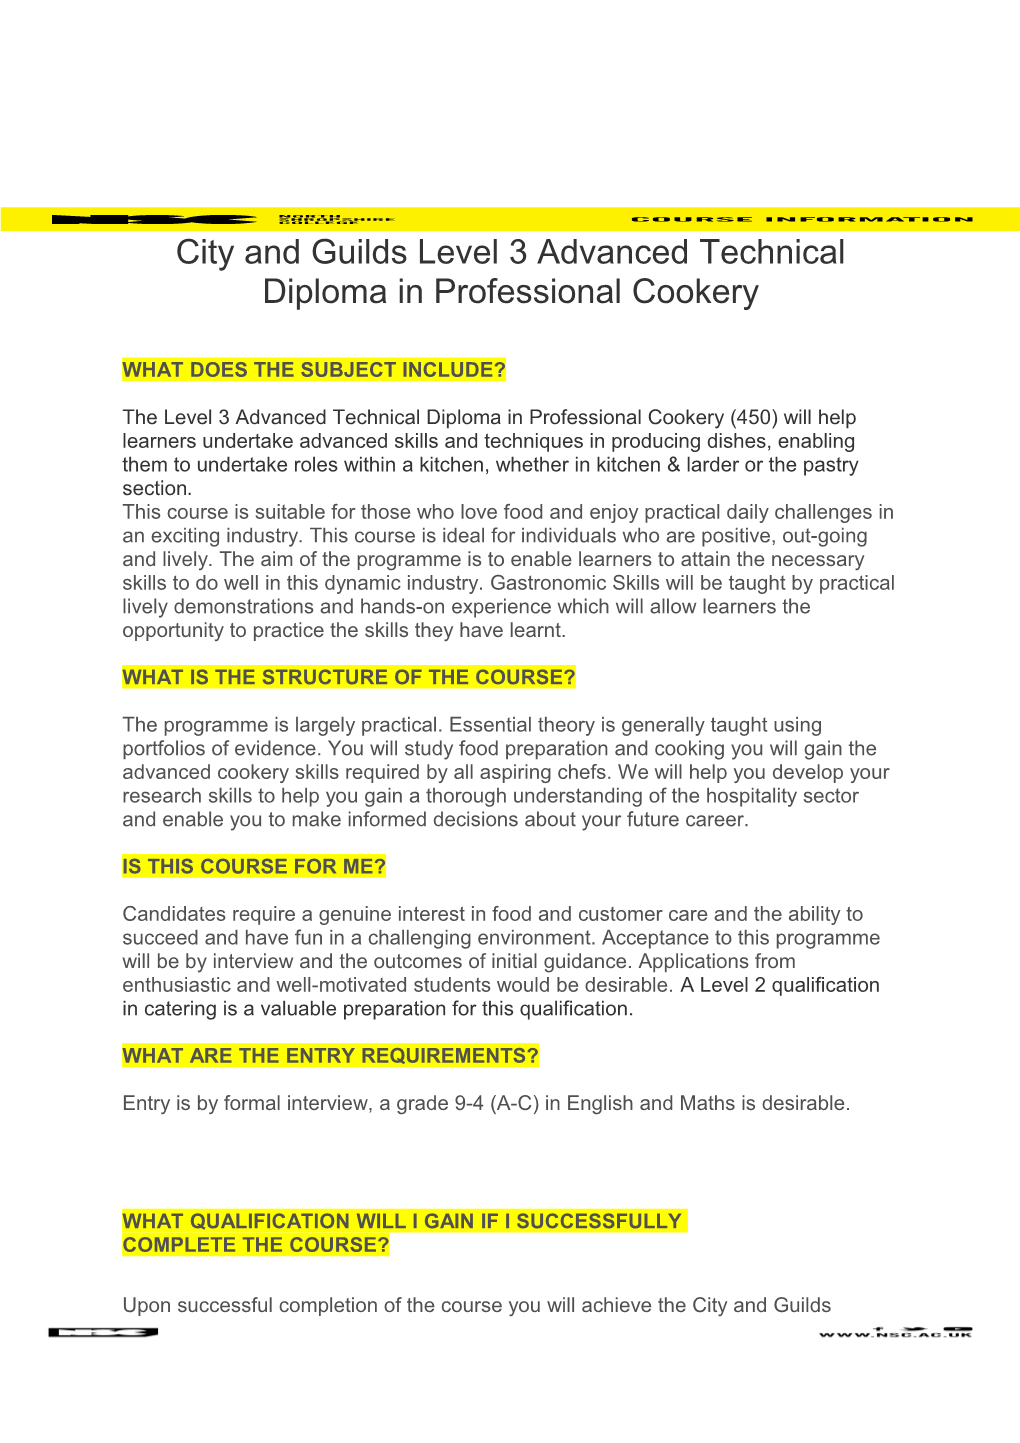 City and Guilds Level 3 Advanced Technical Diploma in Professional Cookery